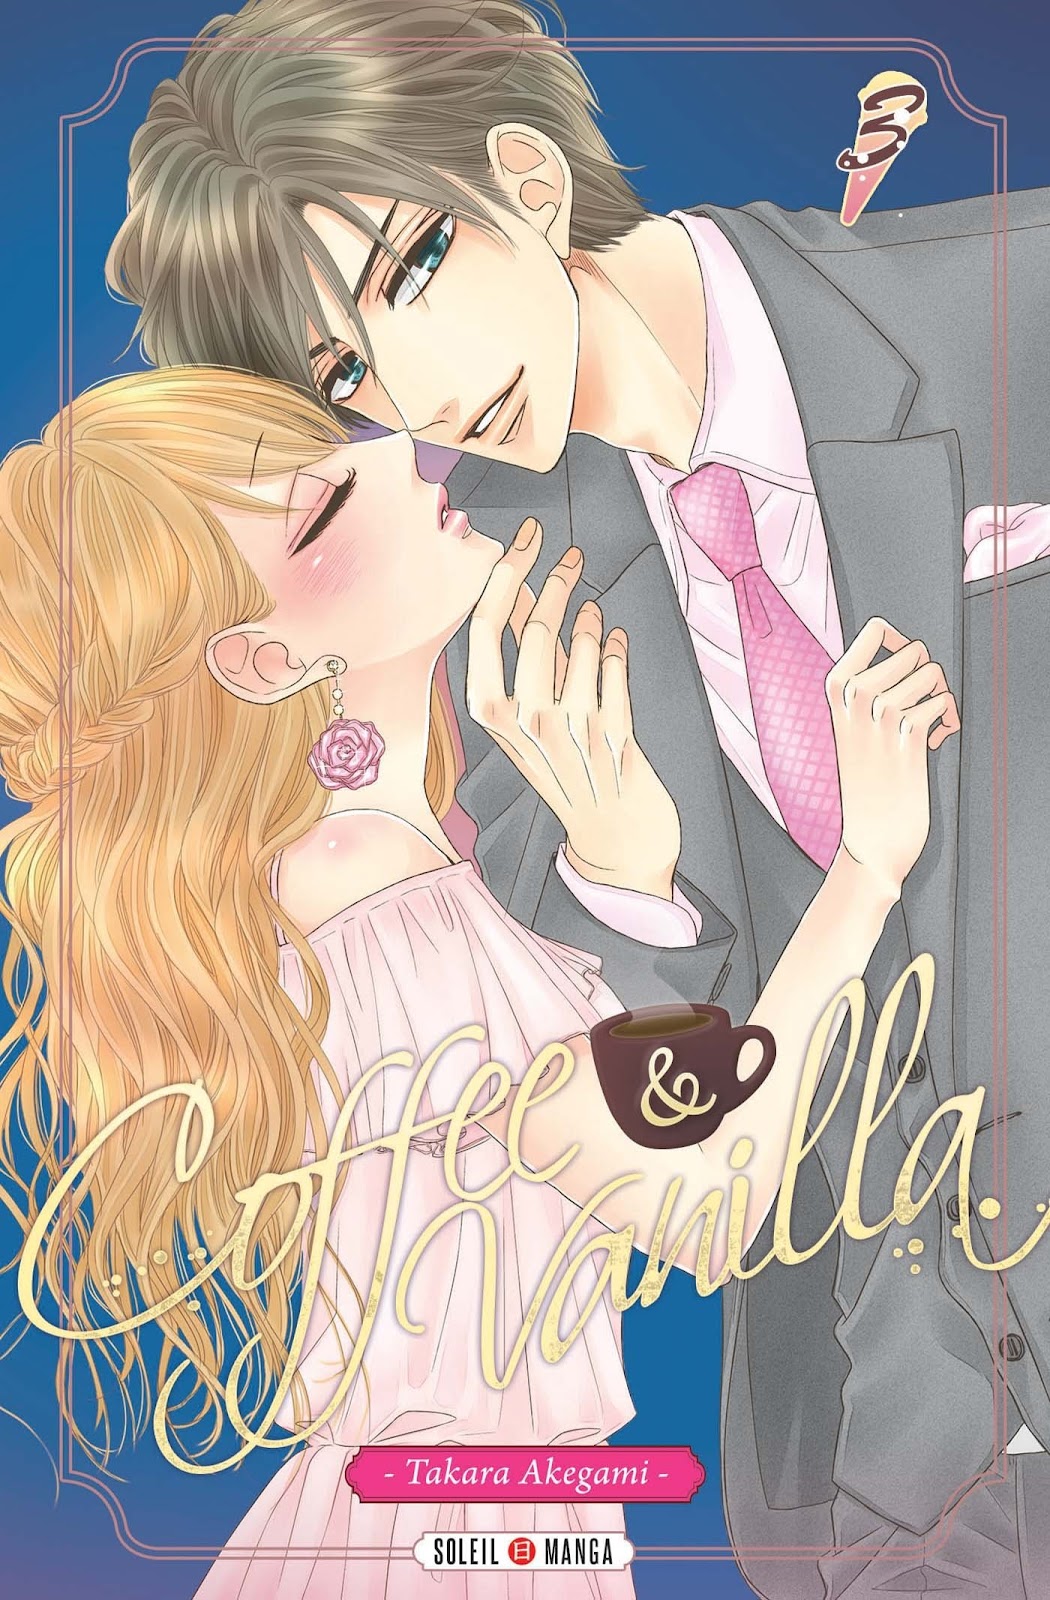 Cover Picture Of Manga Series